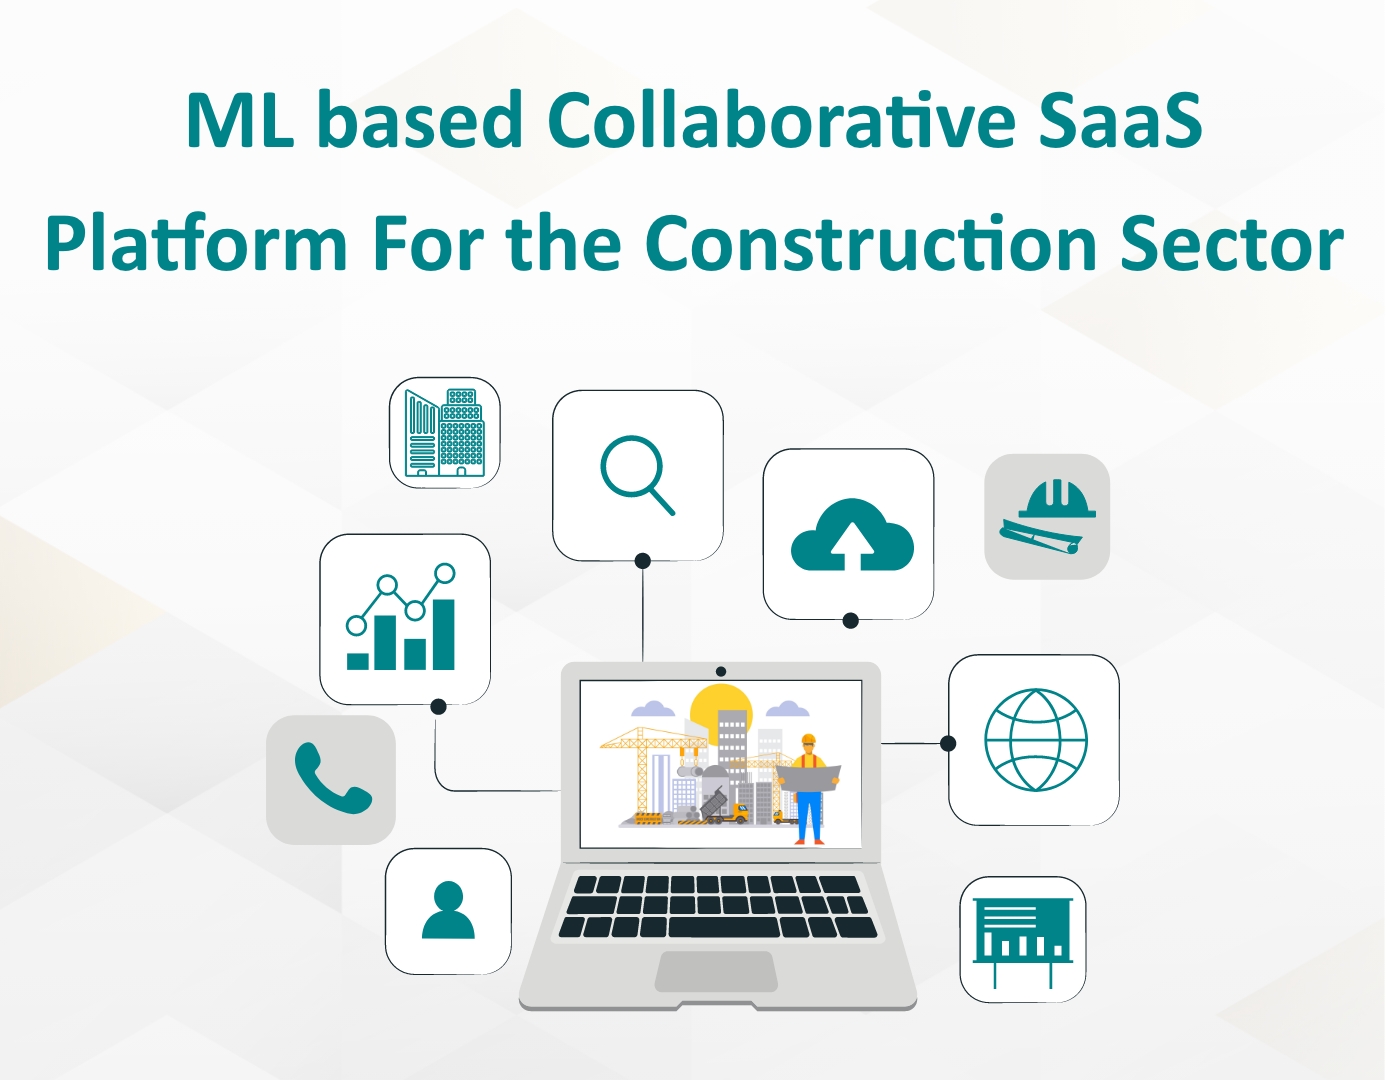 ML-based collaborative SaaS platform revolutionizing the construction sector, improving productivity and efficiency